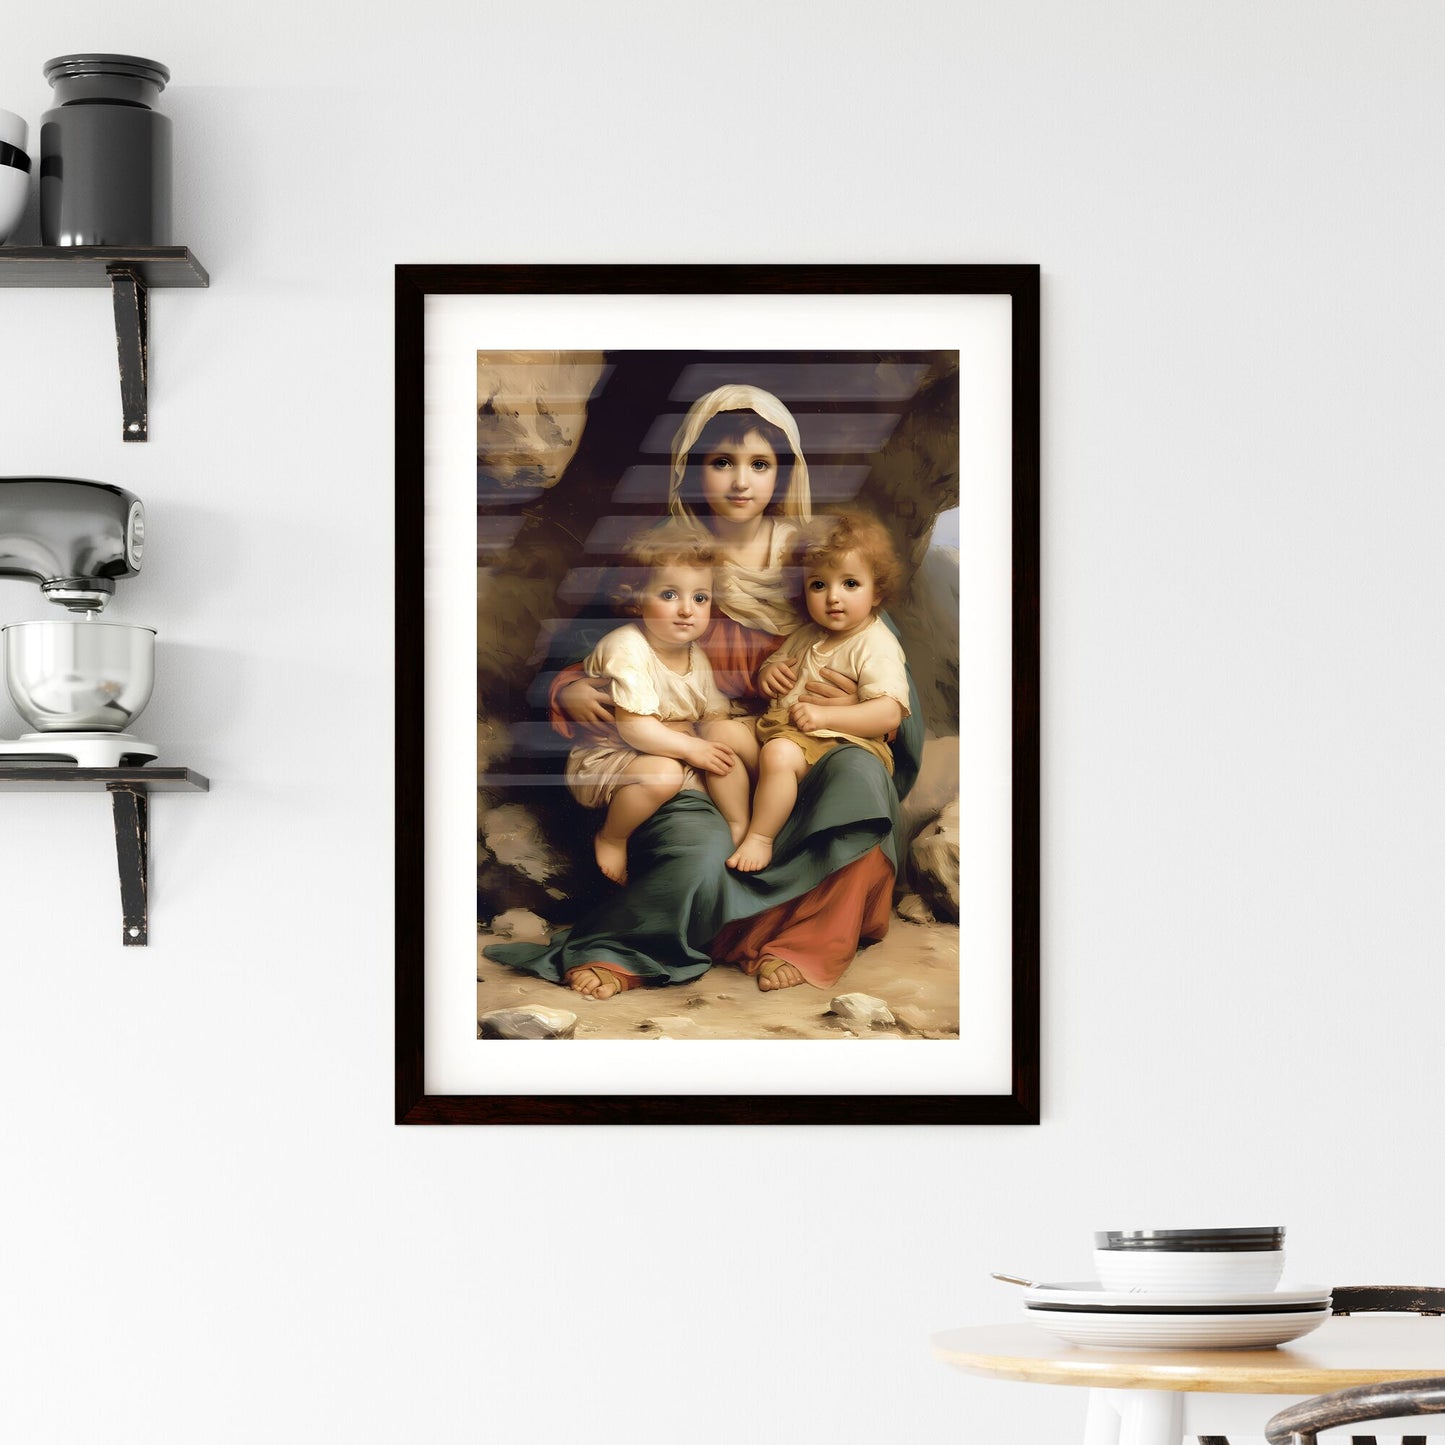 Holy Mary, Mother of God pray for us sinners now and at the hour of our death, amen - Art print of a painting of a woman holding two children Default Title